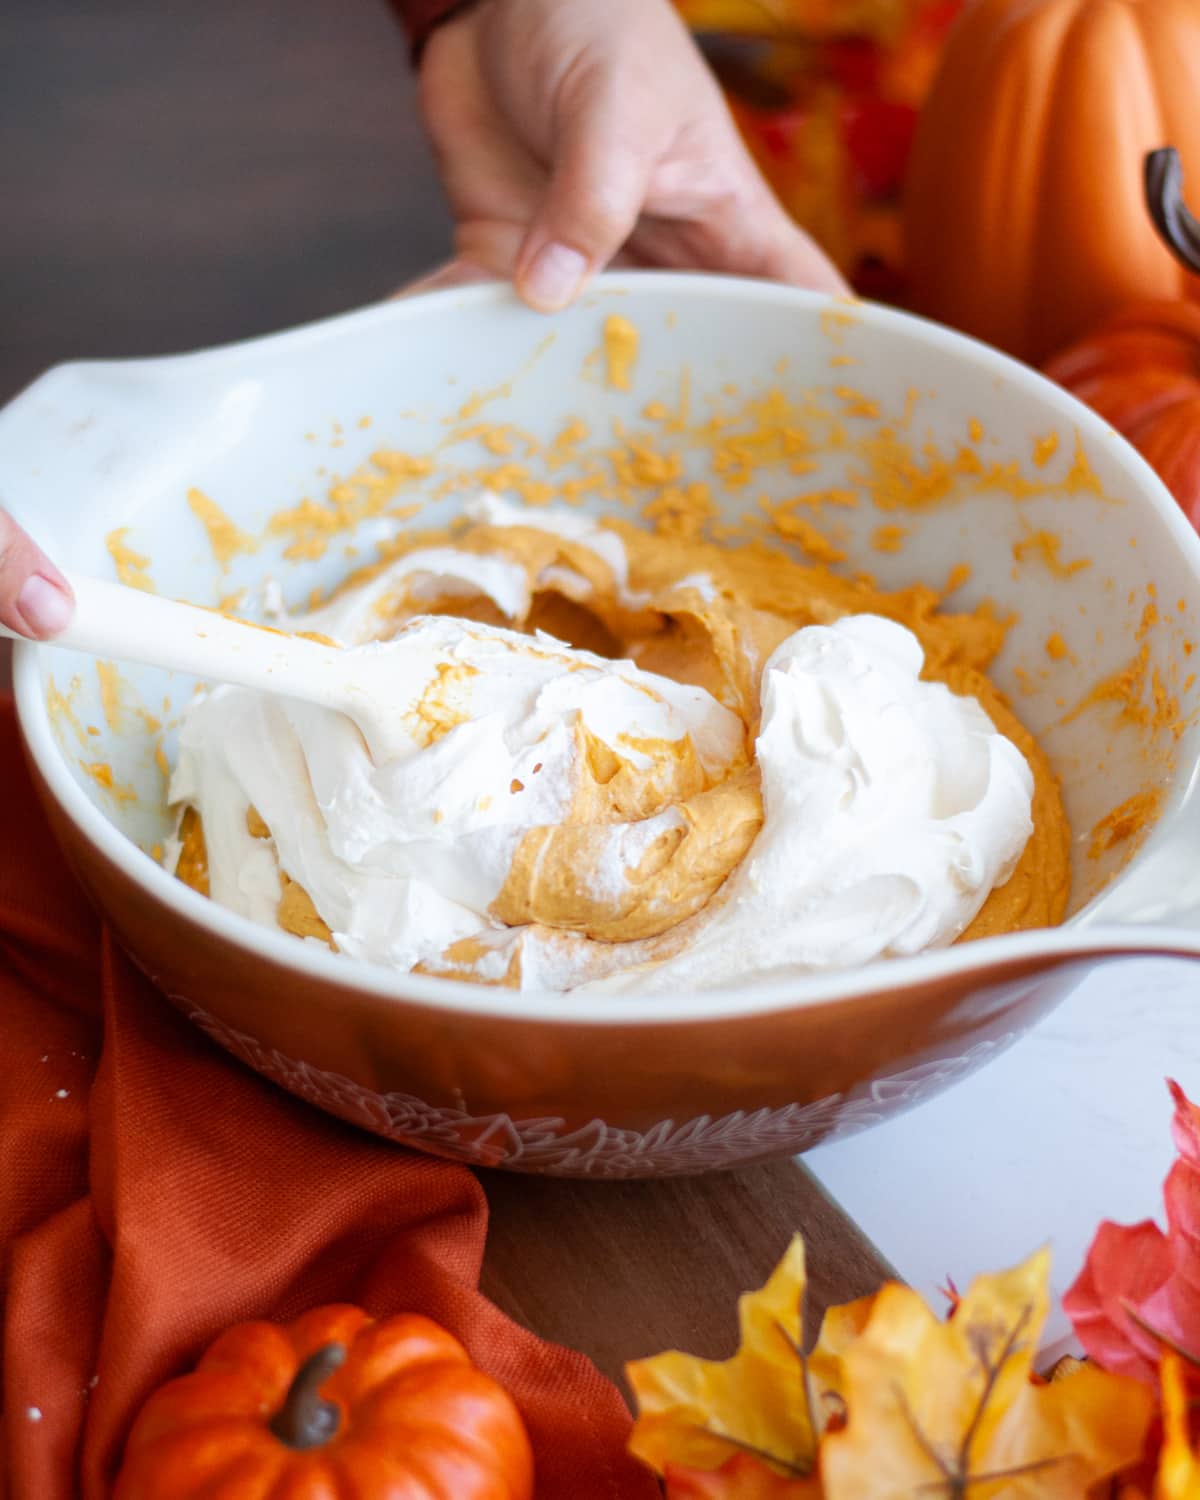 process shot showing how to make pumpkin dip. the thawed cool whip is being gently folded into the rest of the ingredients.